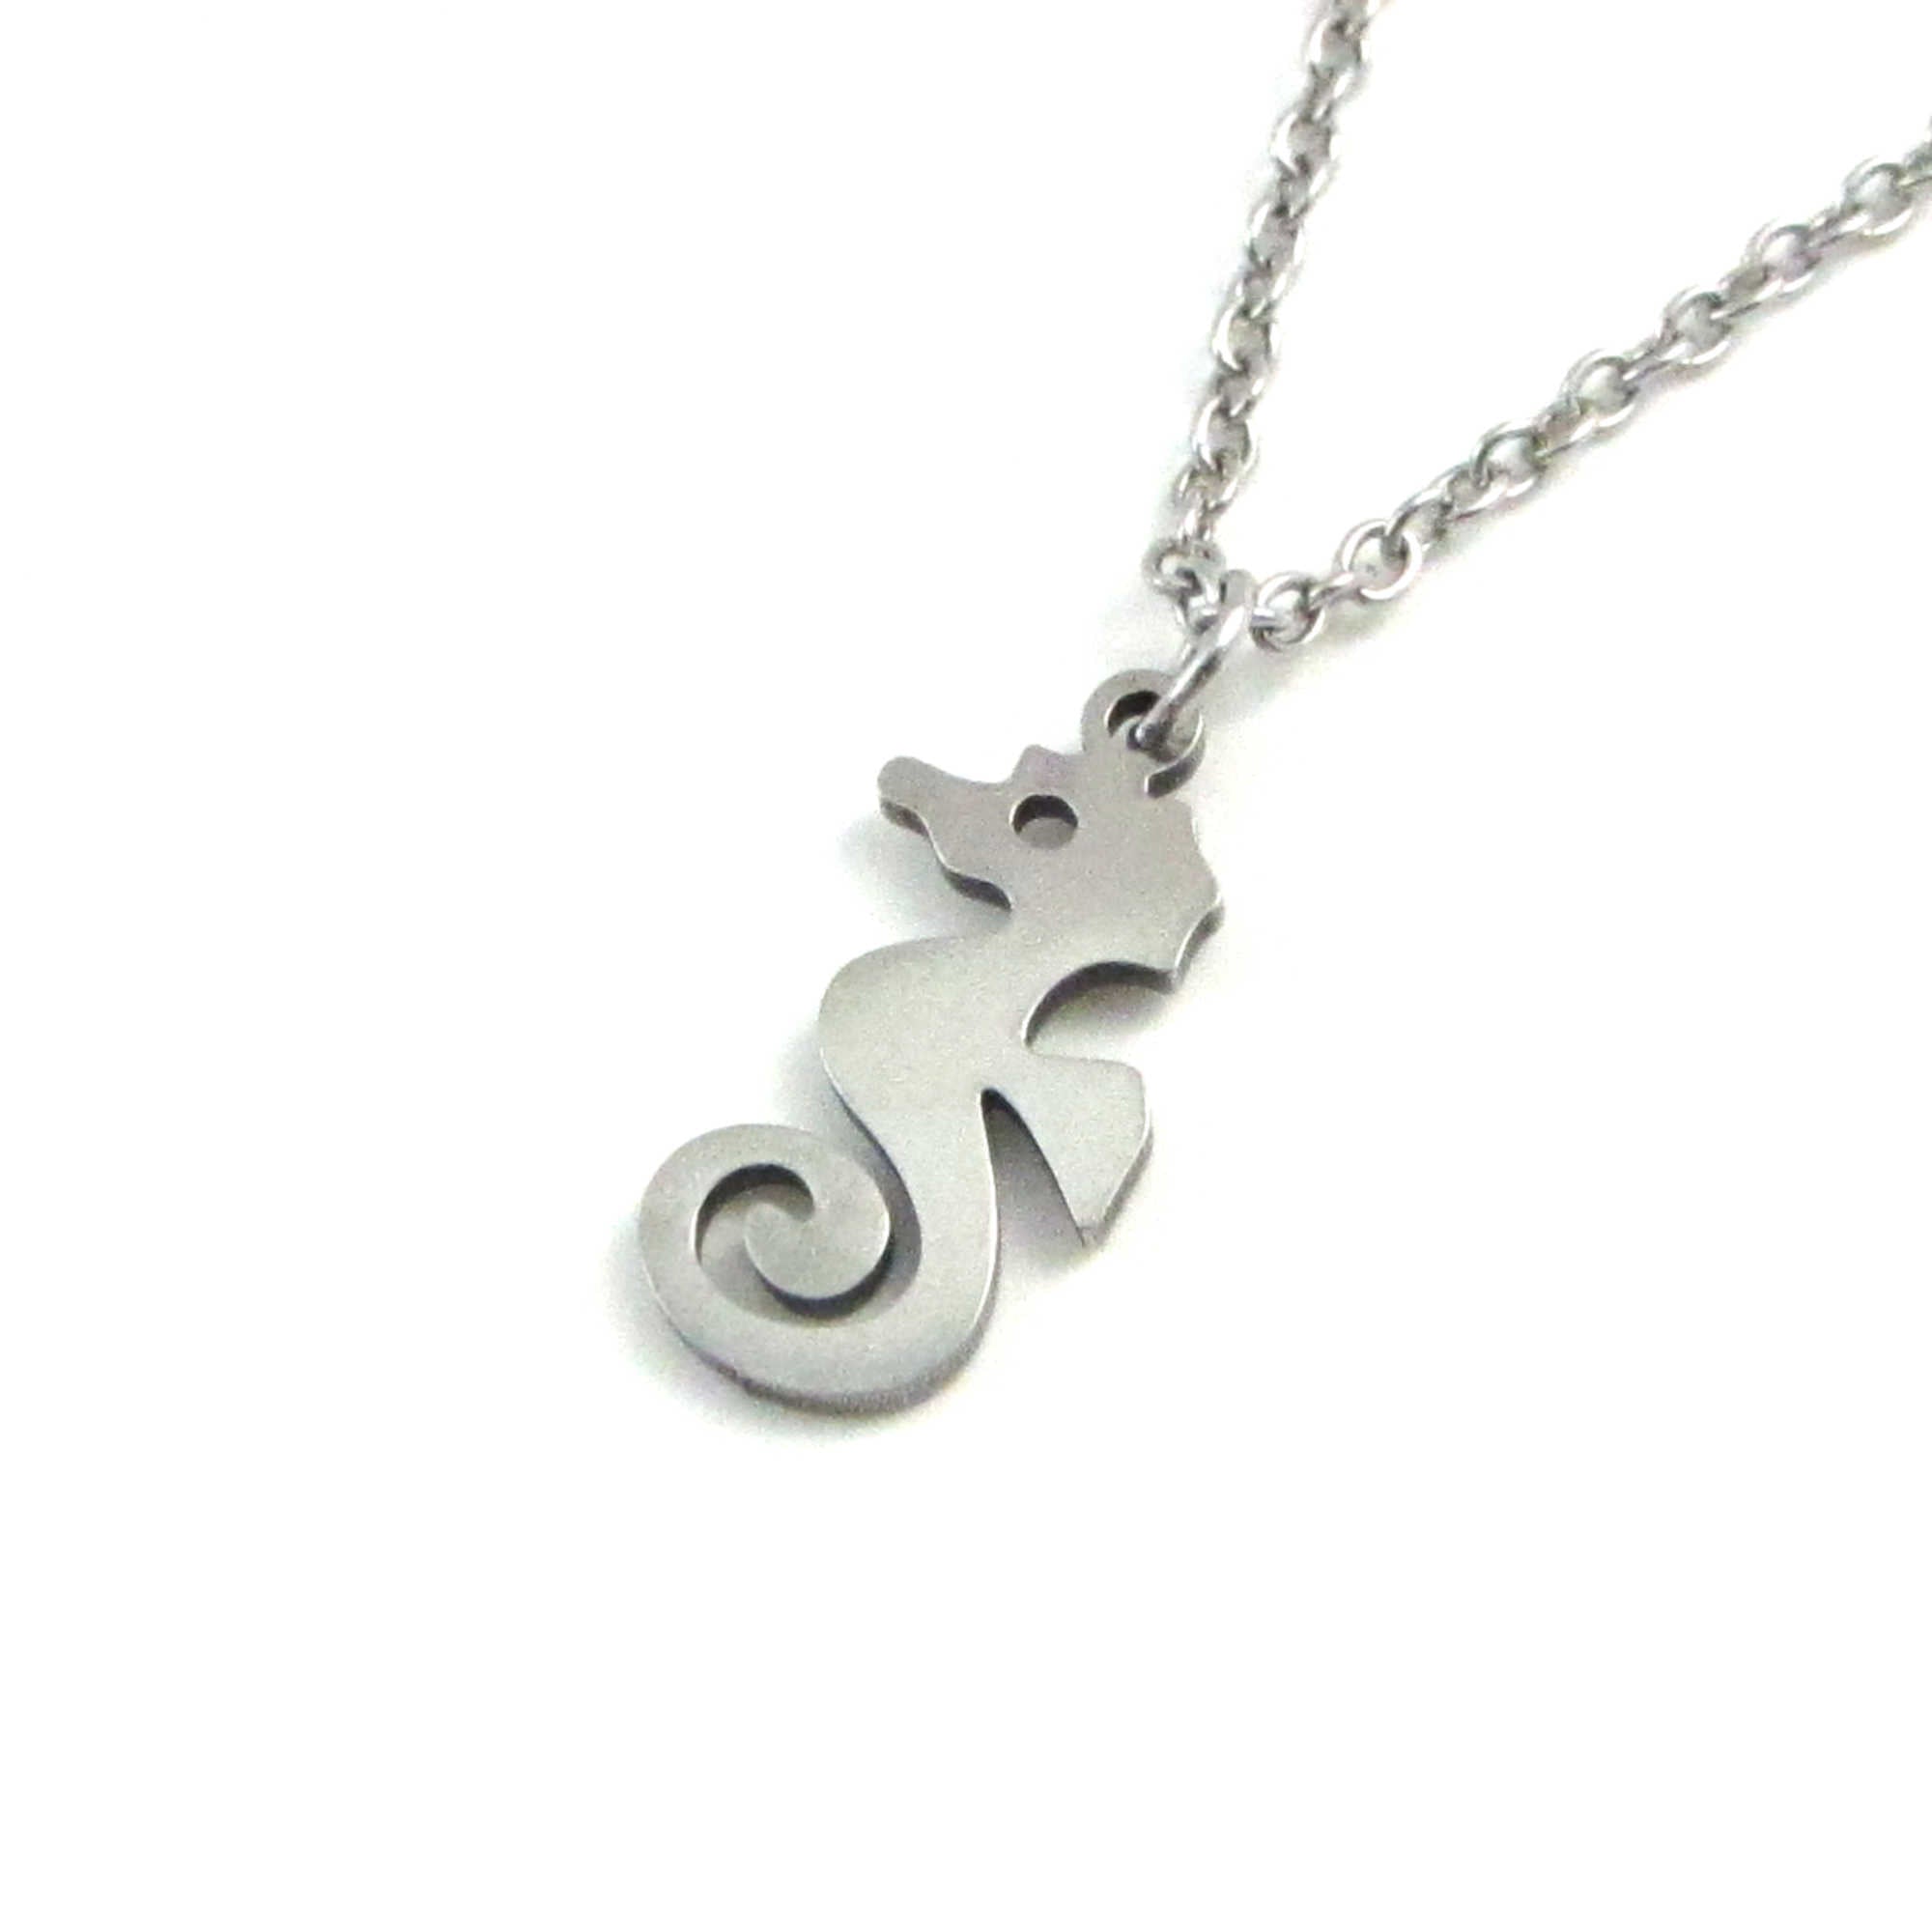 nautical seahorse charm on a stainless steel chain